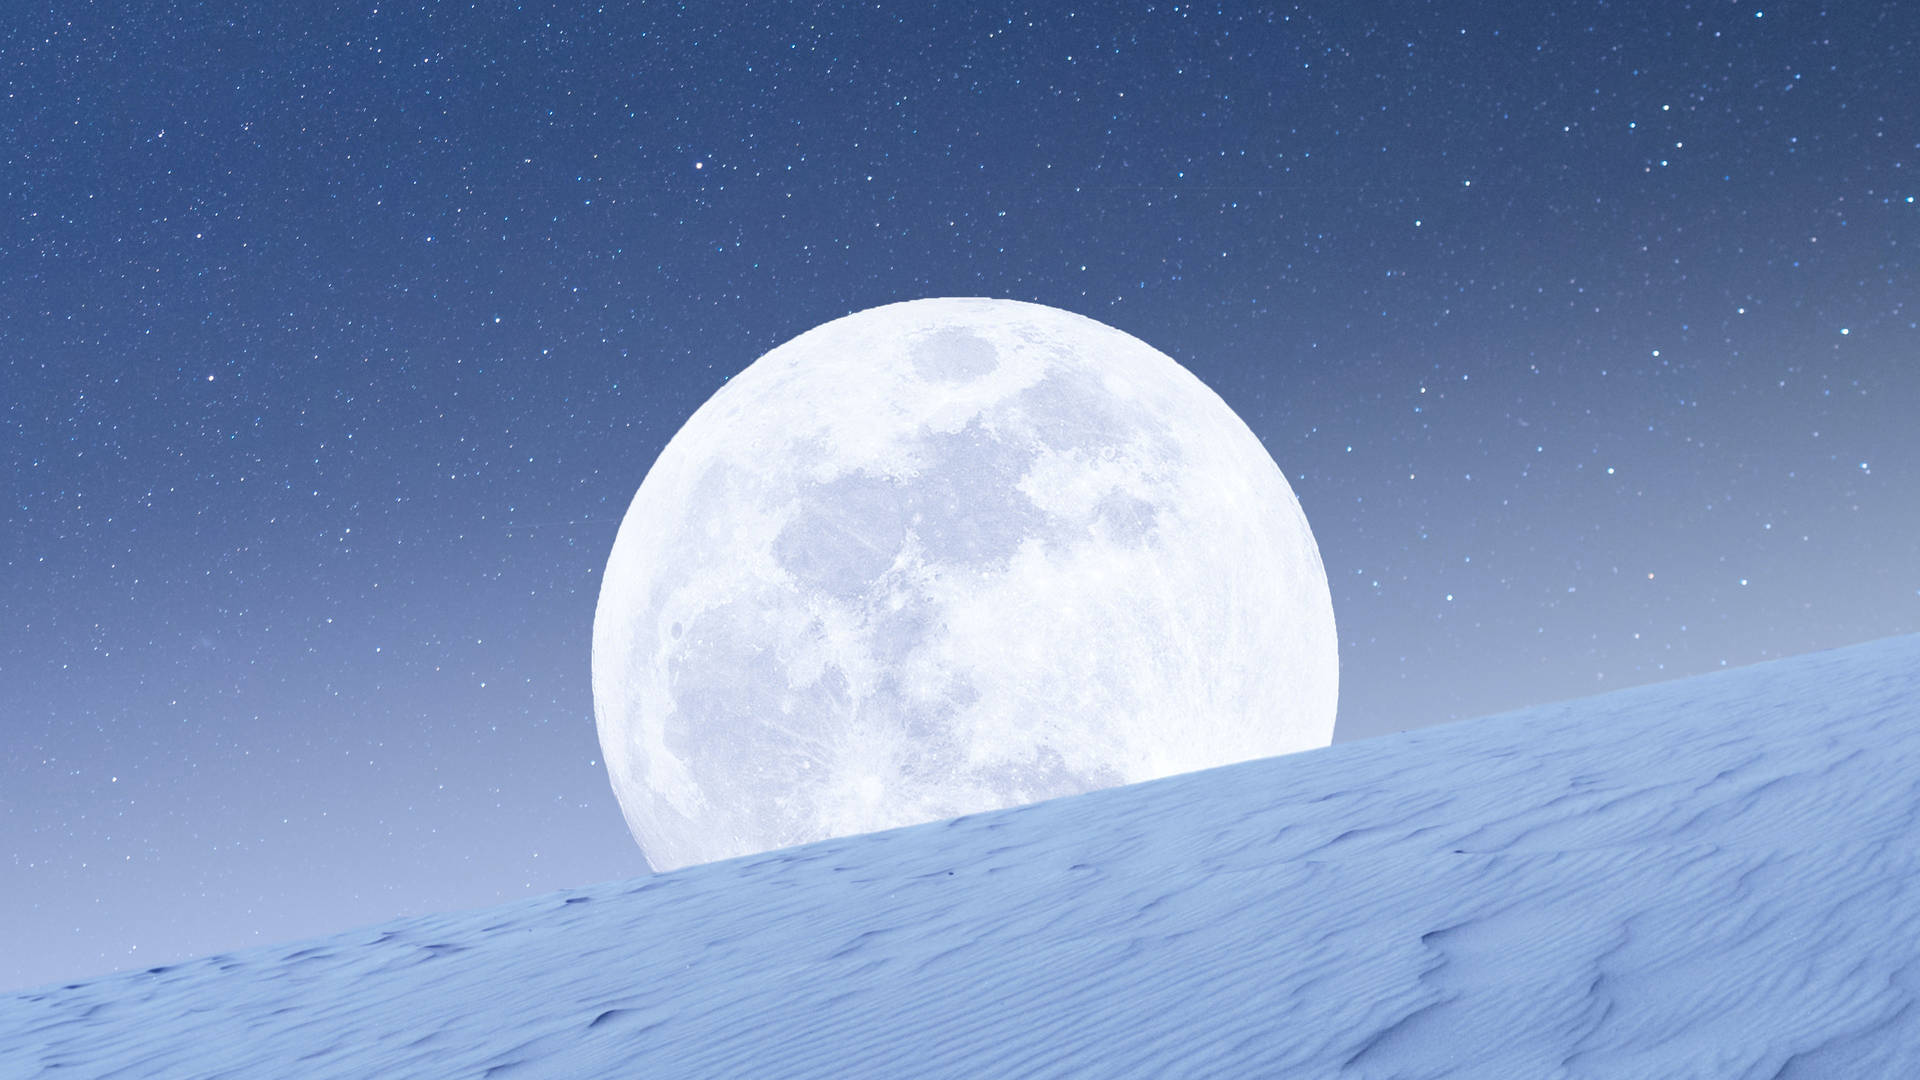 Aesthetic Moon Over The Snowy Hill Background